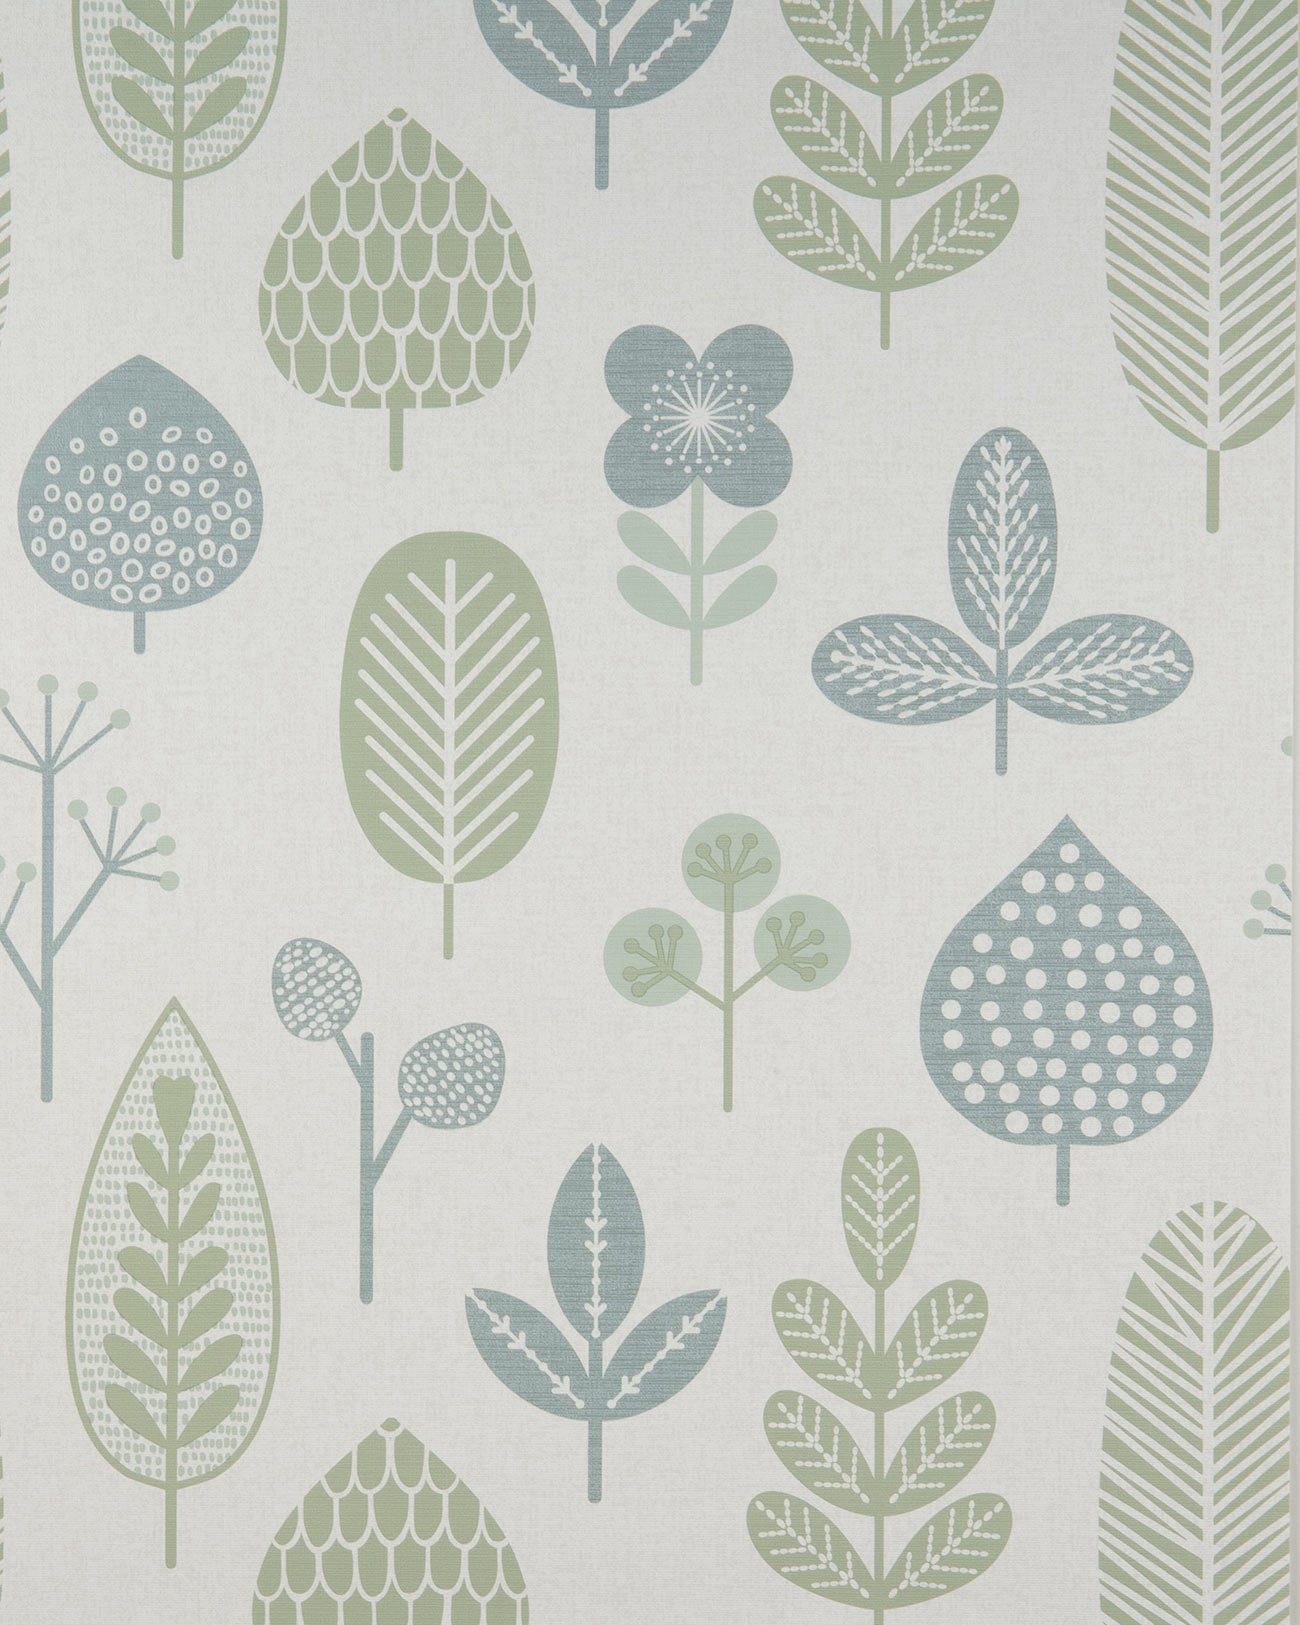 Floral wallpaper Profhome BV919084-DI textured hot embossed non-woven wallpaper in country style matt white mint green 5.33 m2